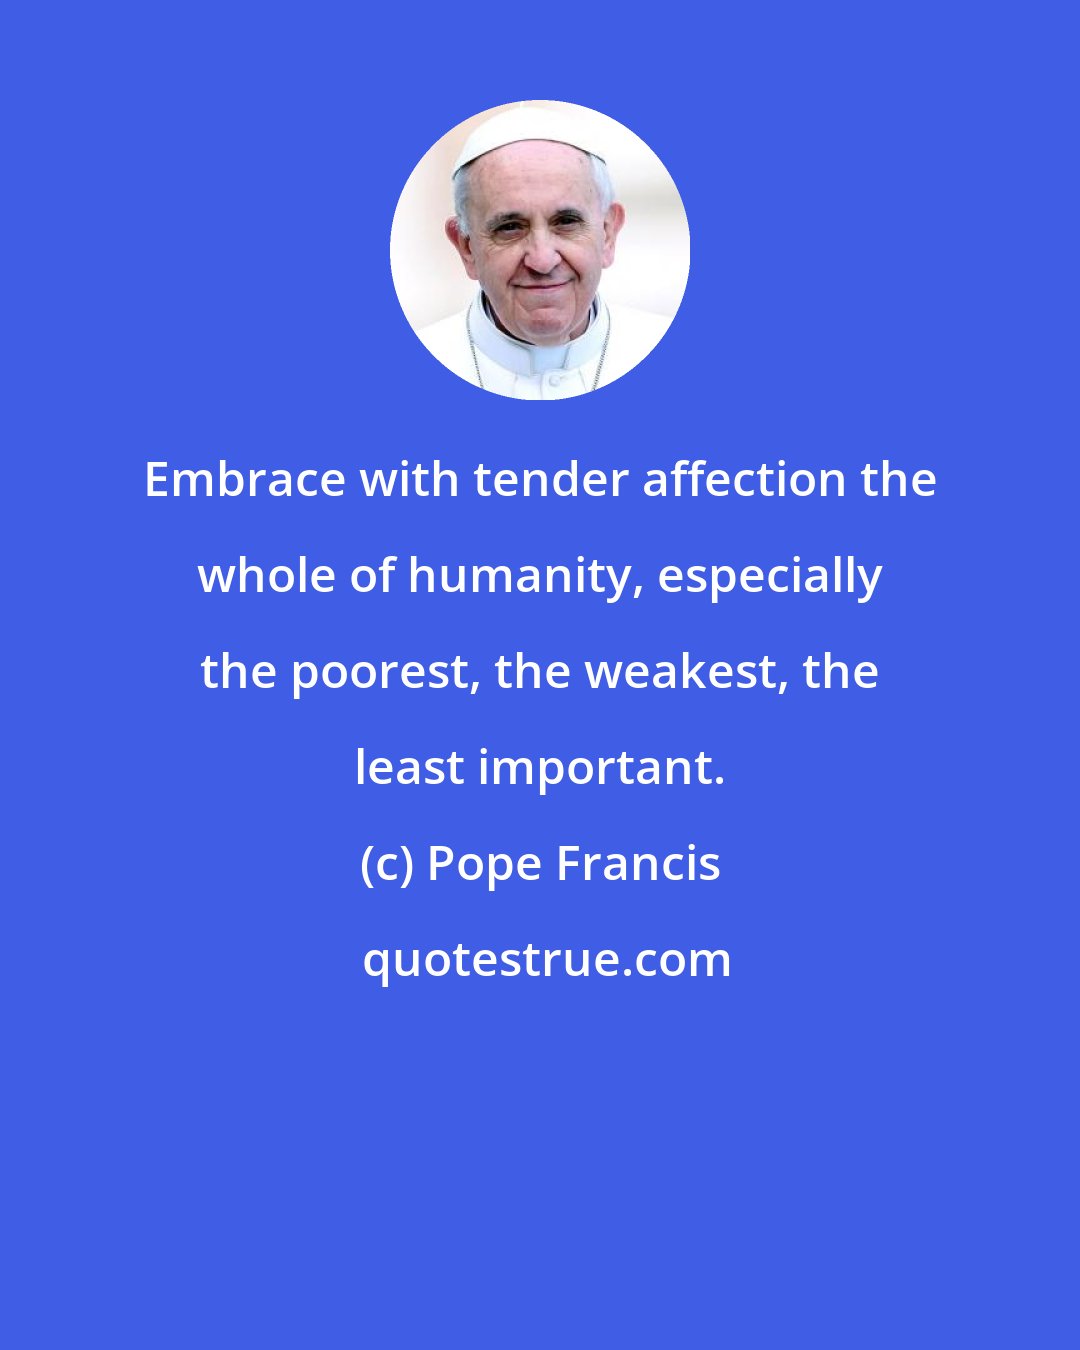 Pope Francis: Embrace with tender affection the whole of humanity, especially the poorest, the weakest, the least important.